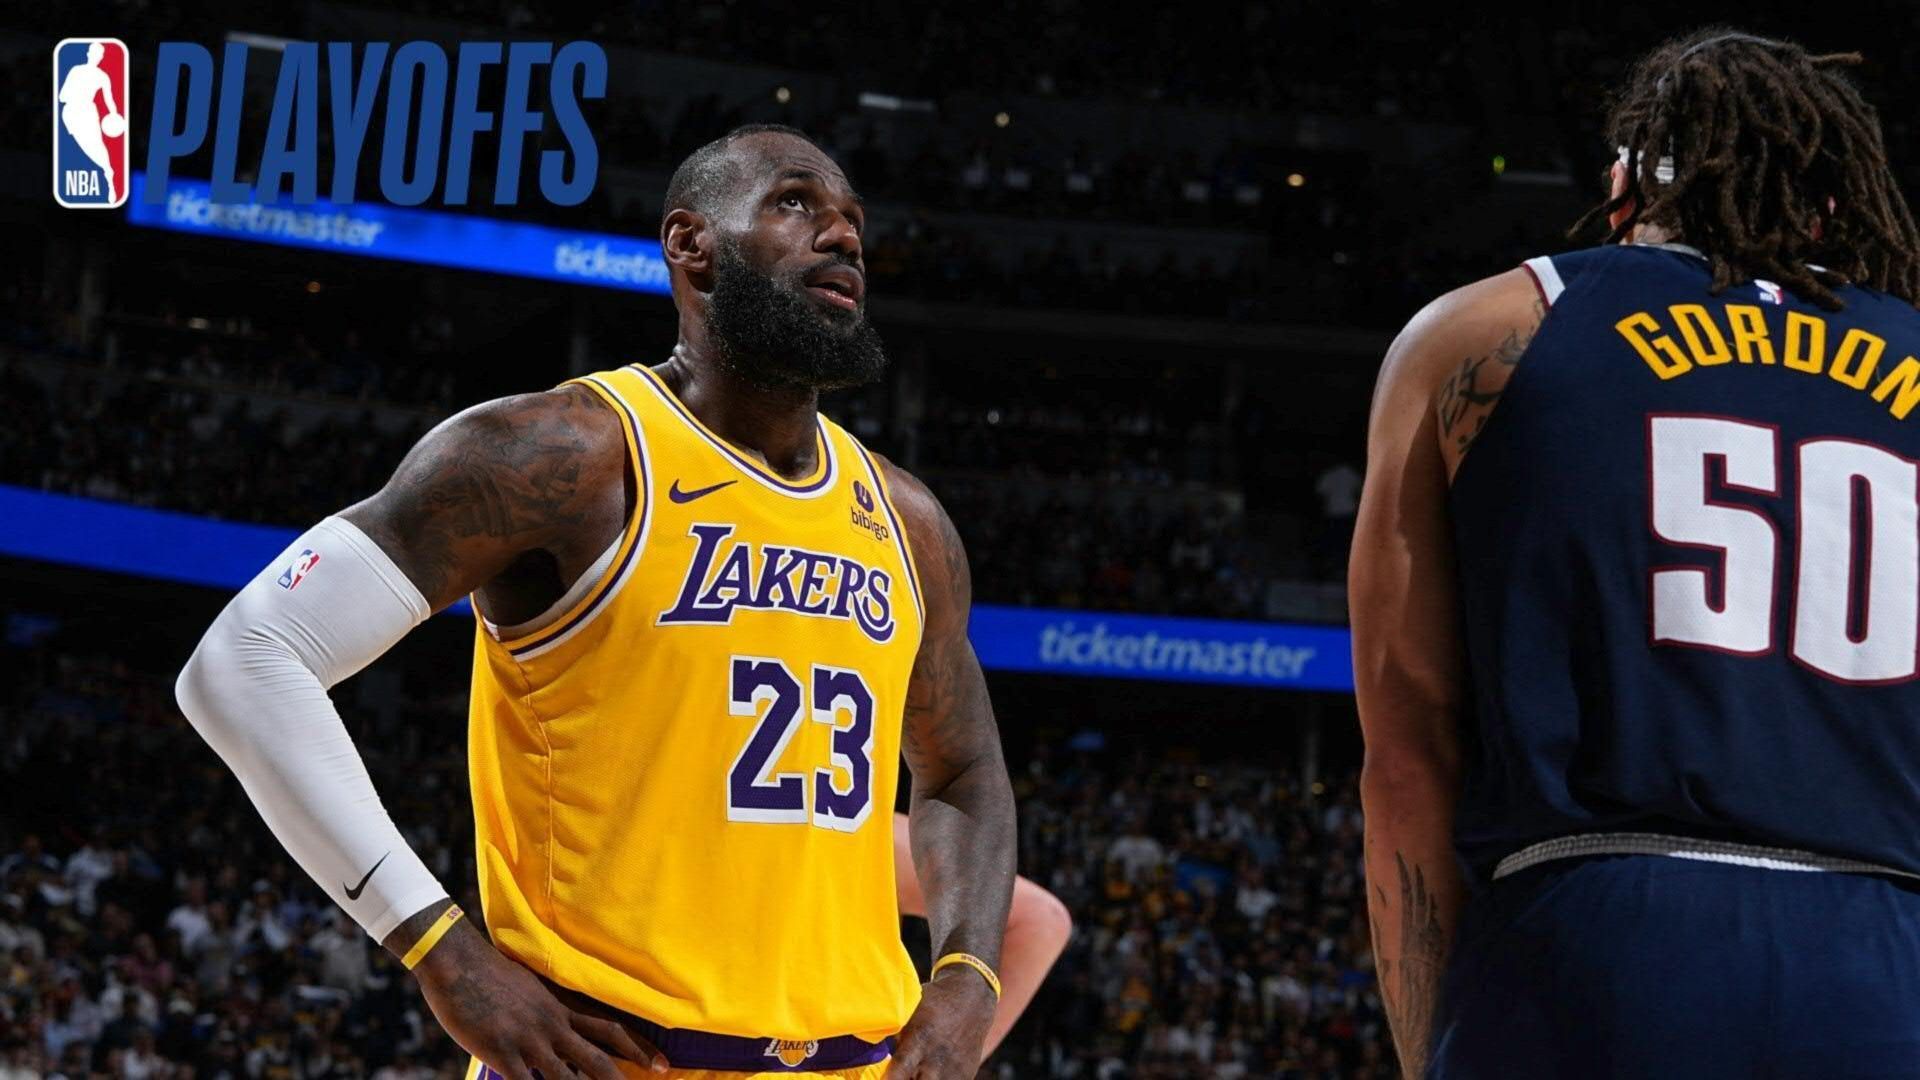 NBA: James out with Lakers - future open